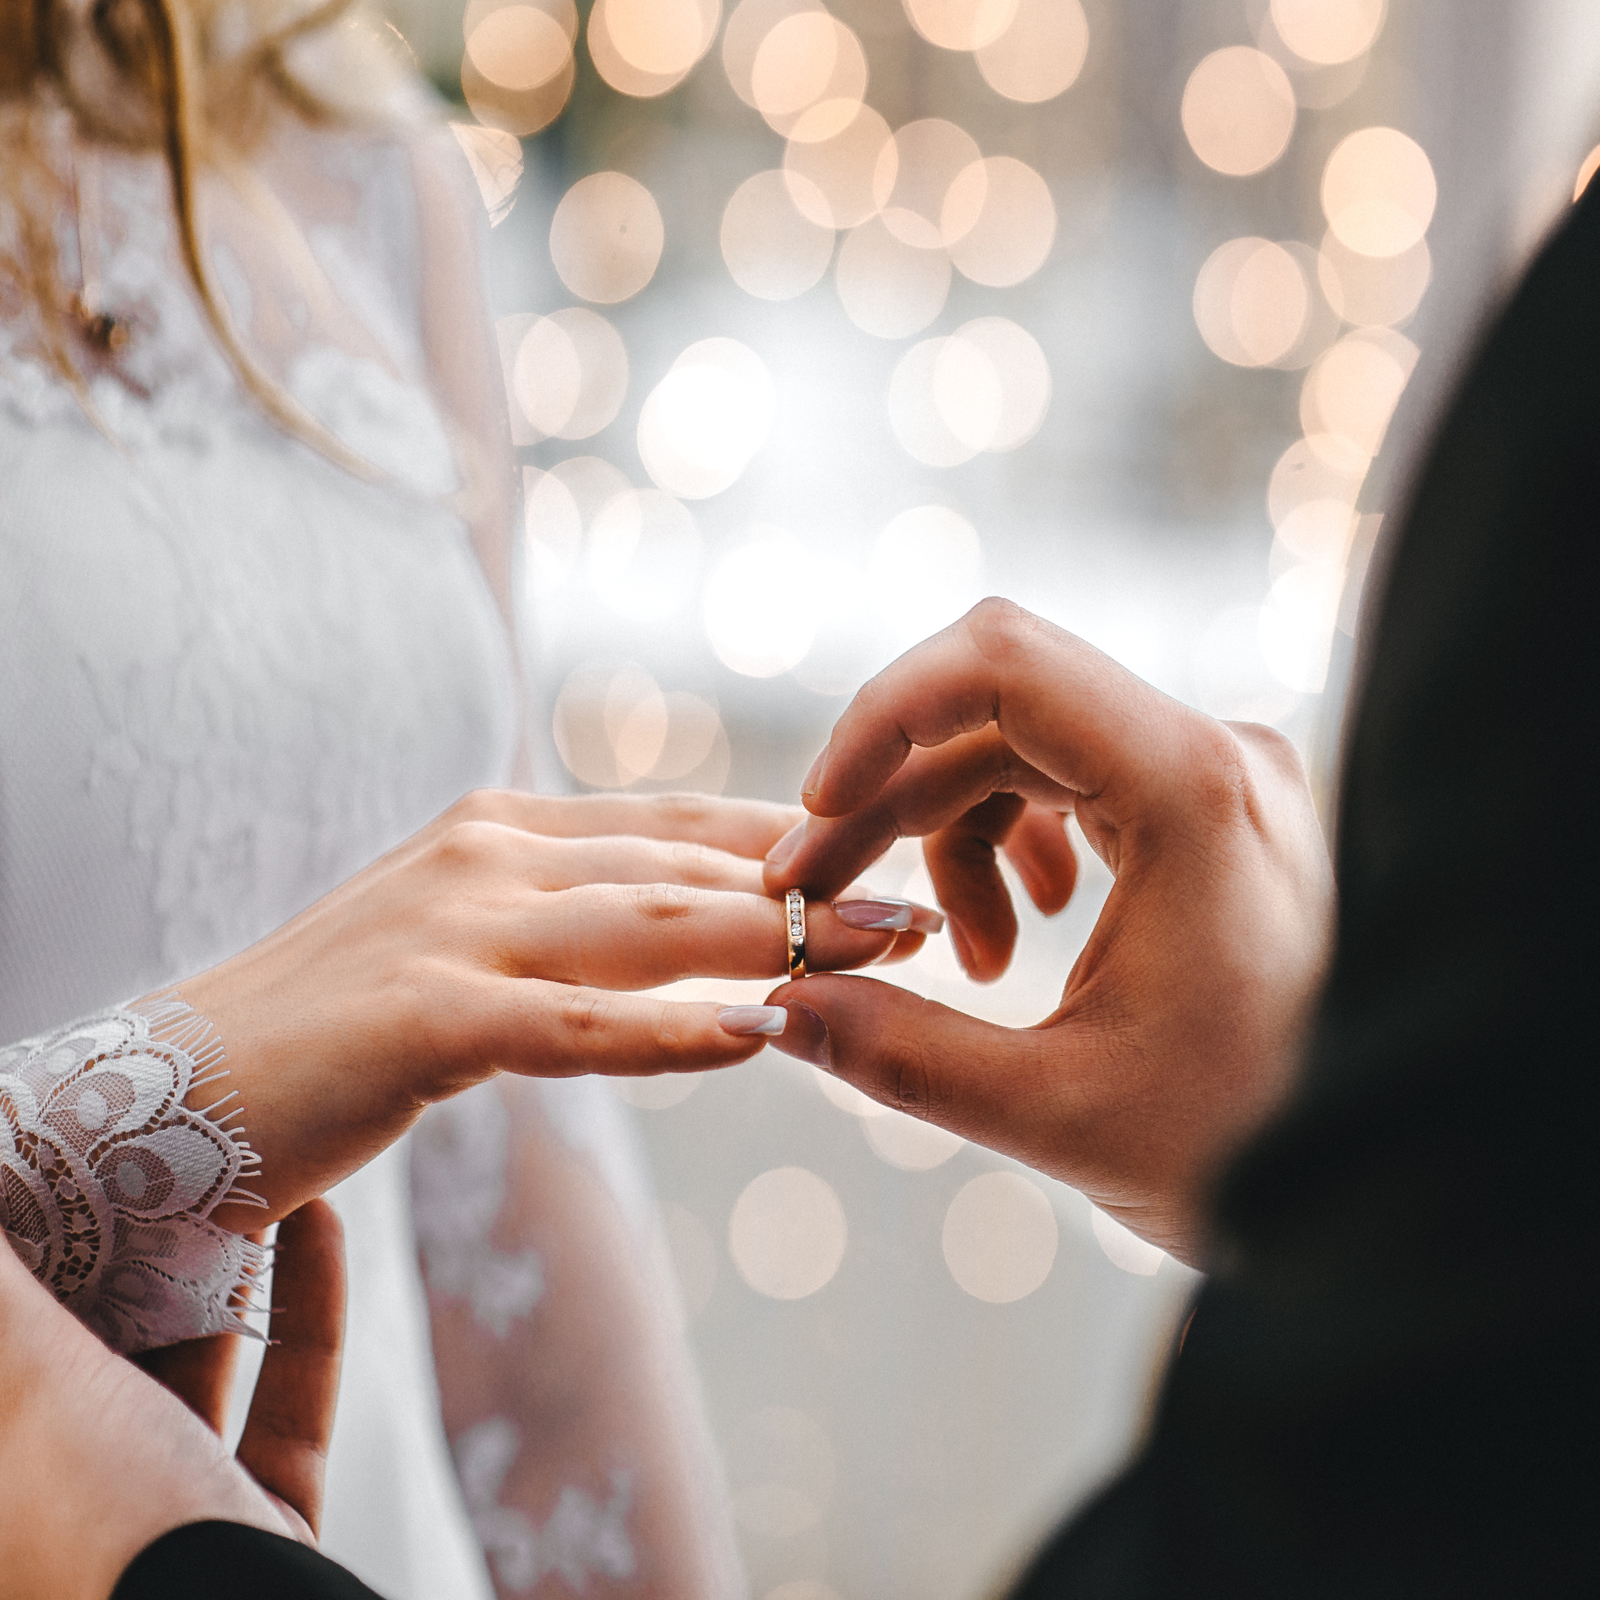 Nevada Sees an Influx of Blockchain Recorded Marriages in 2018